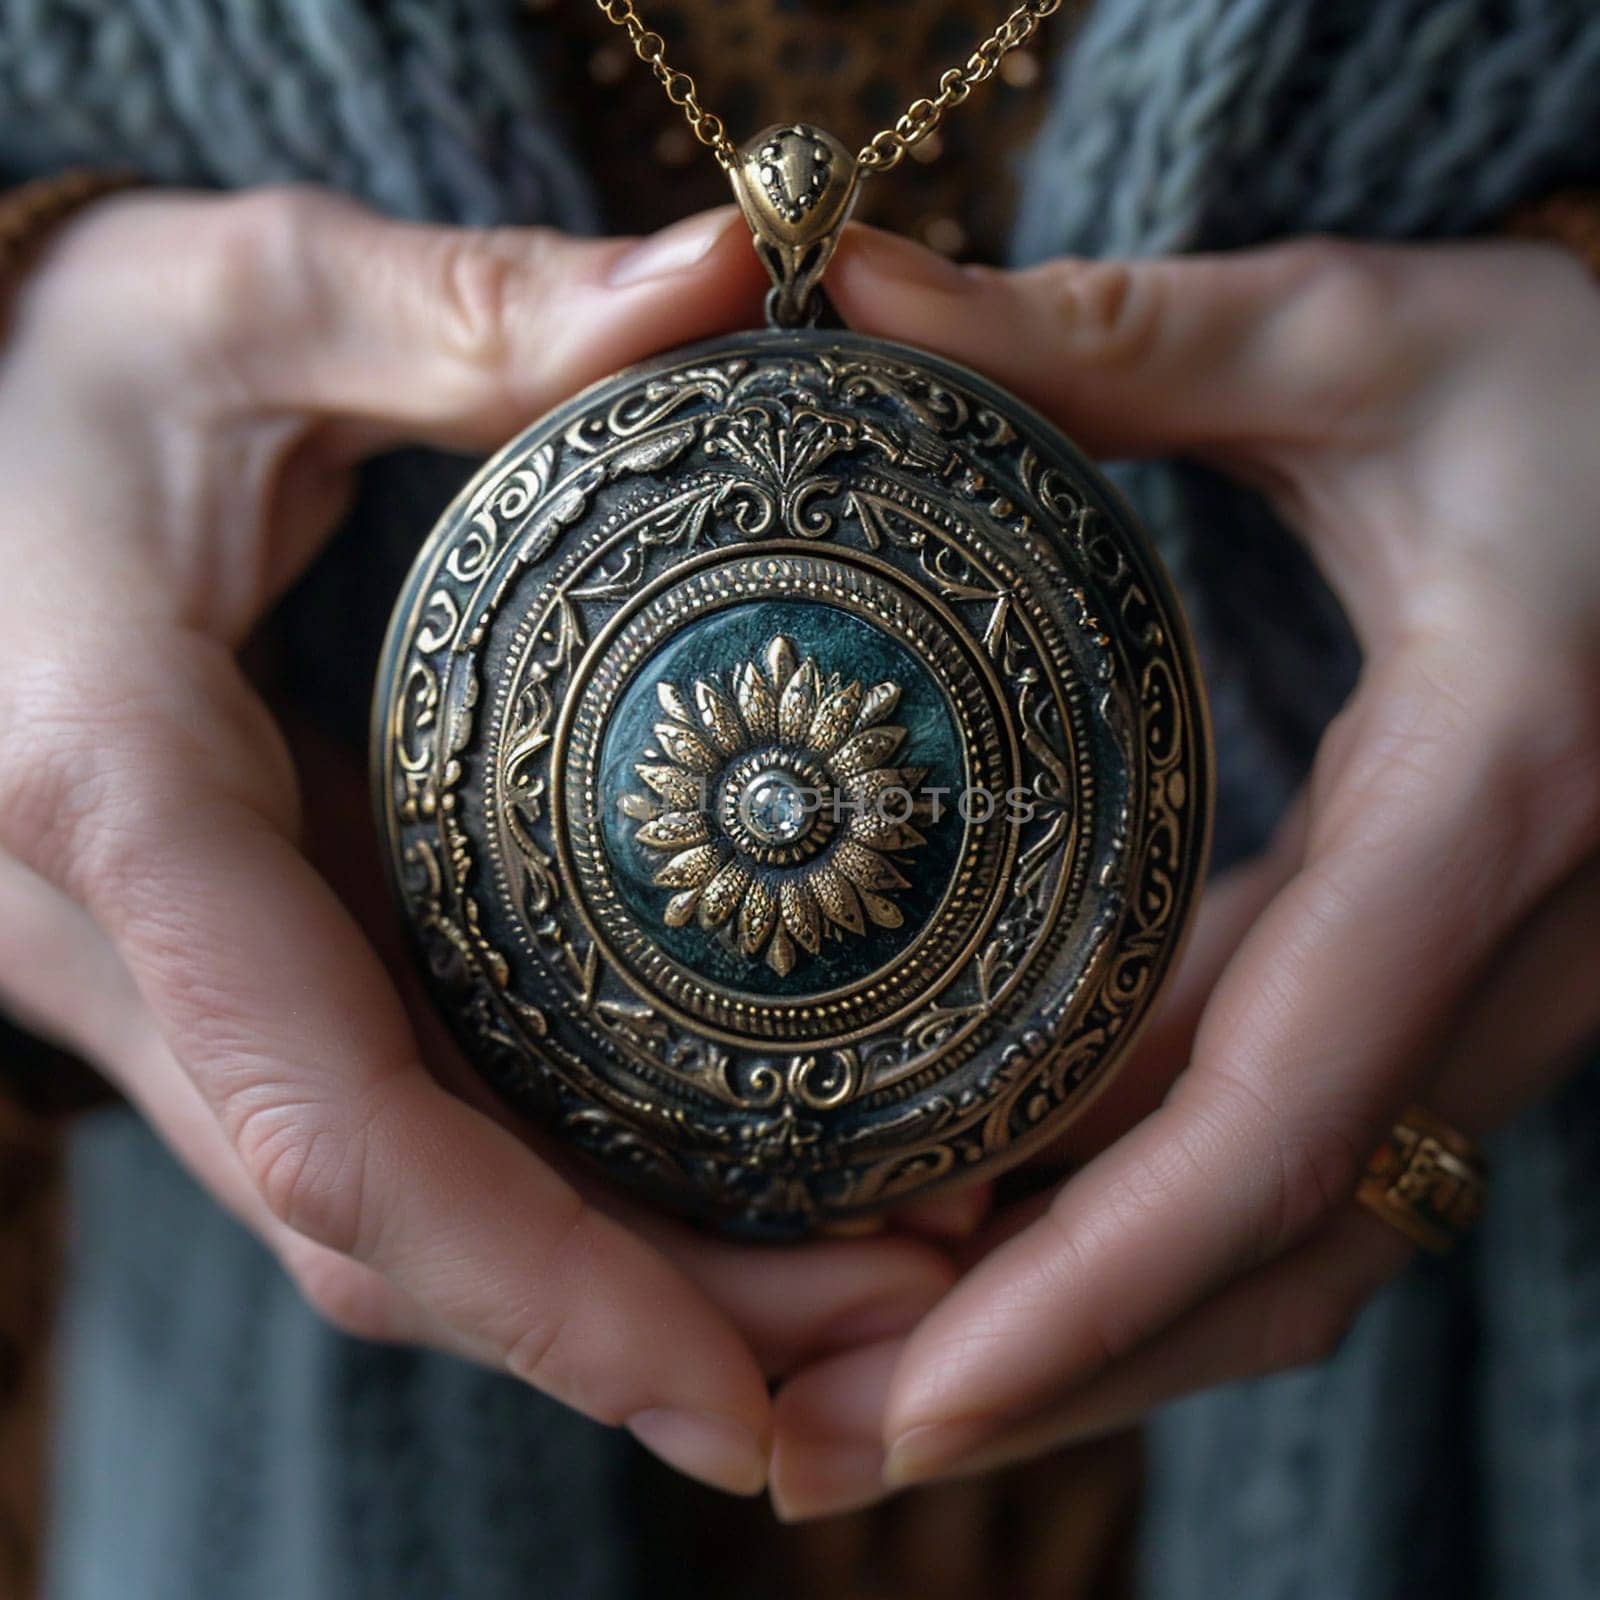 Fingers clutching a locket, evoking personal history, memory, and sentimental value.